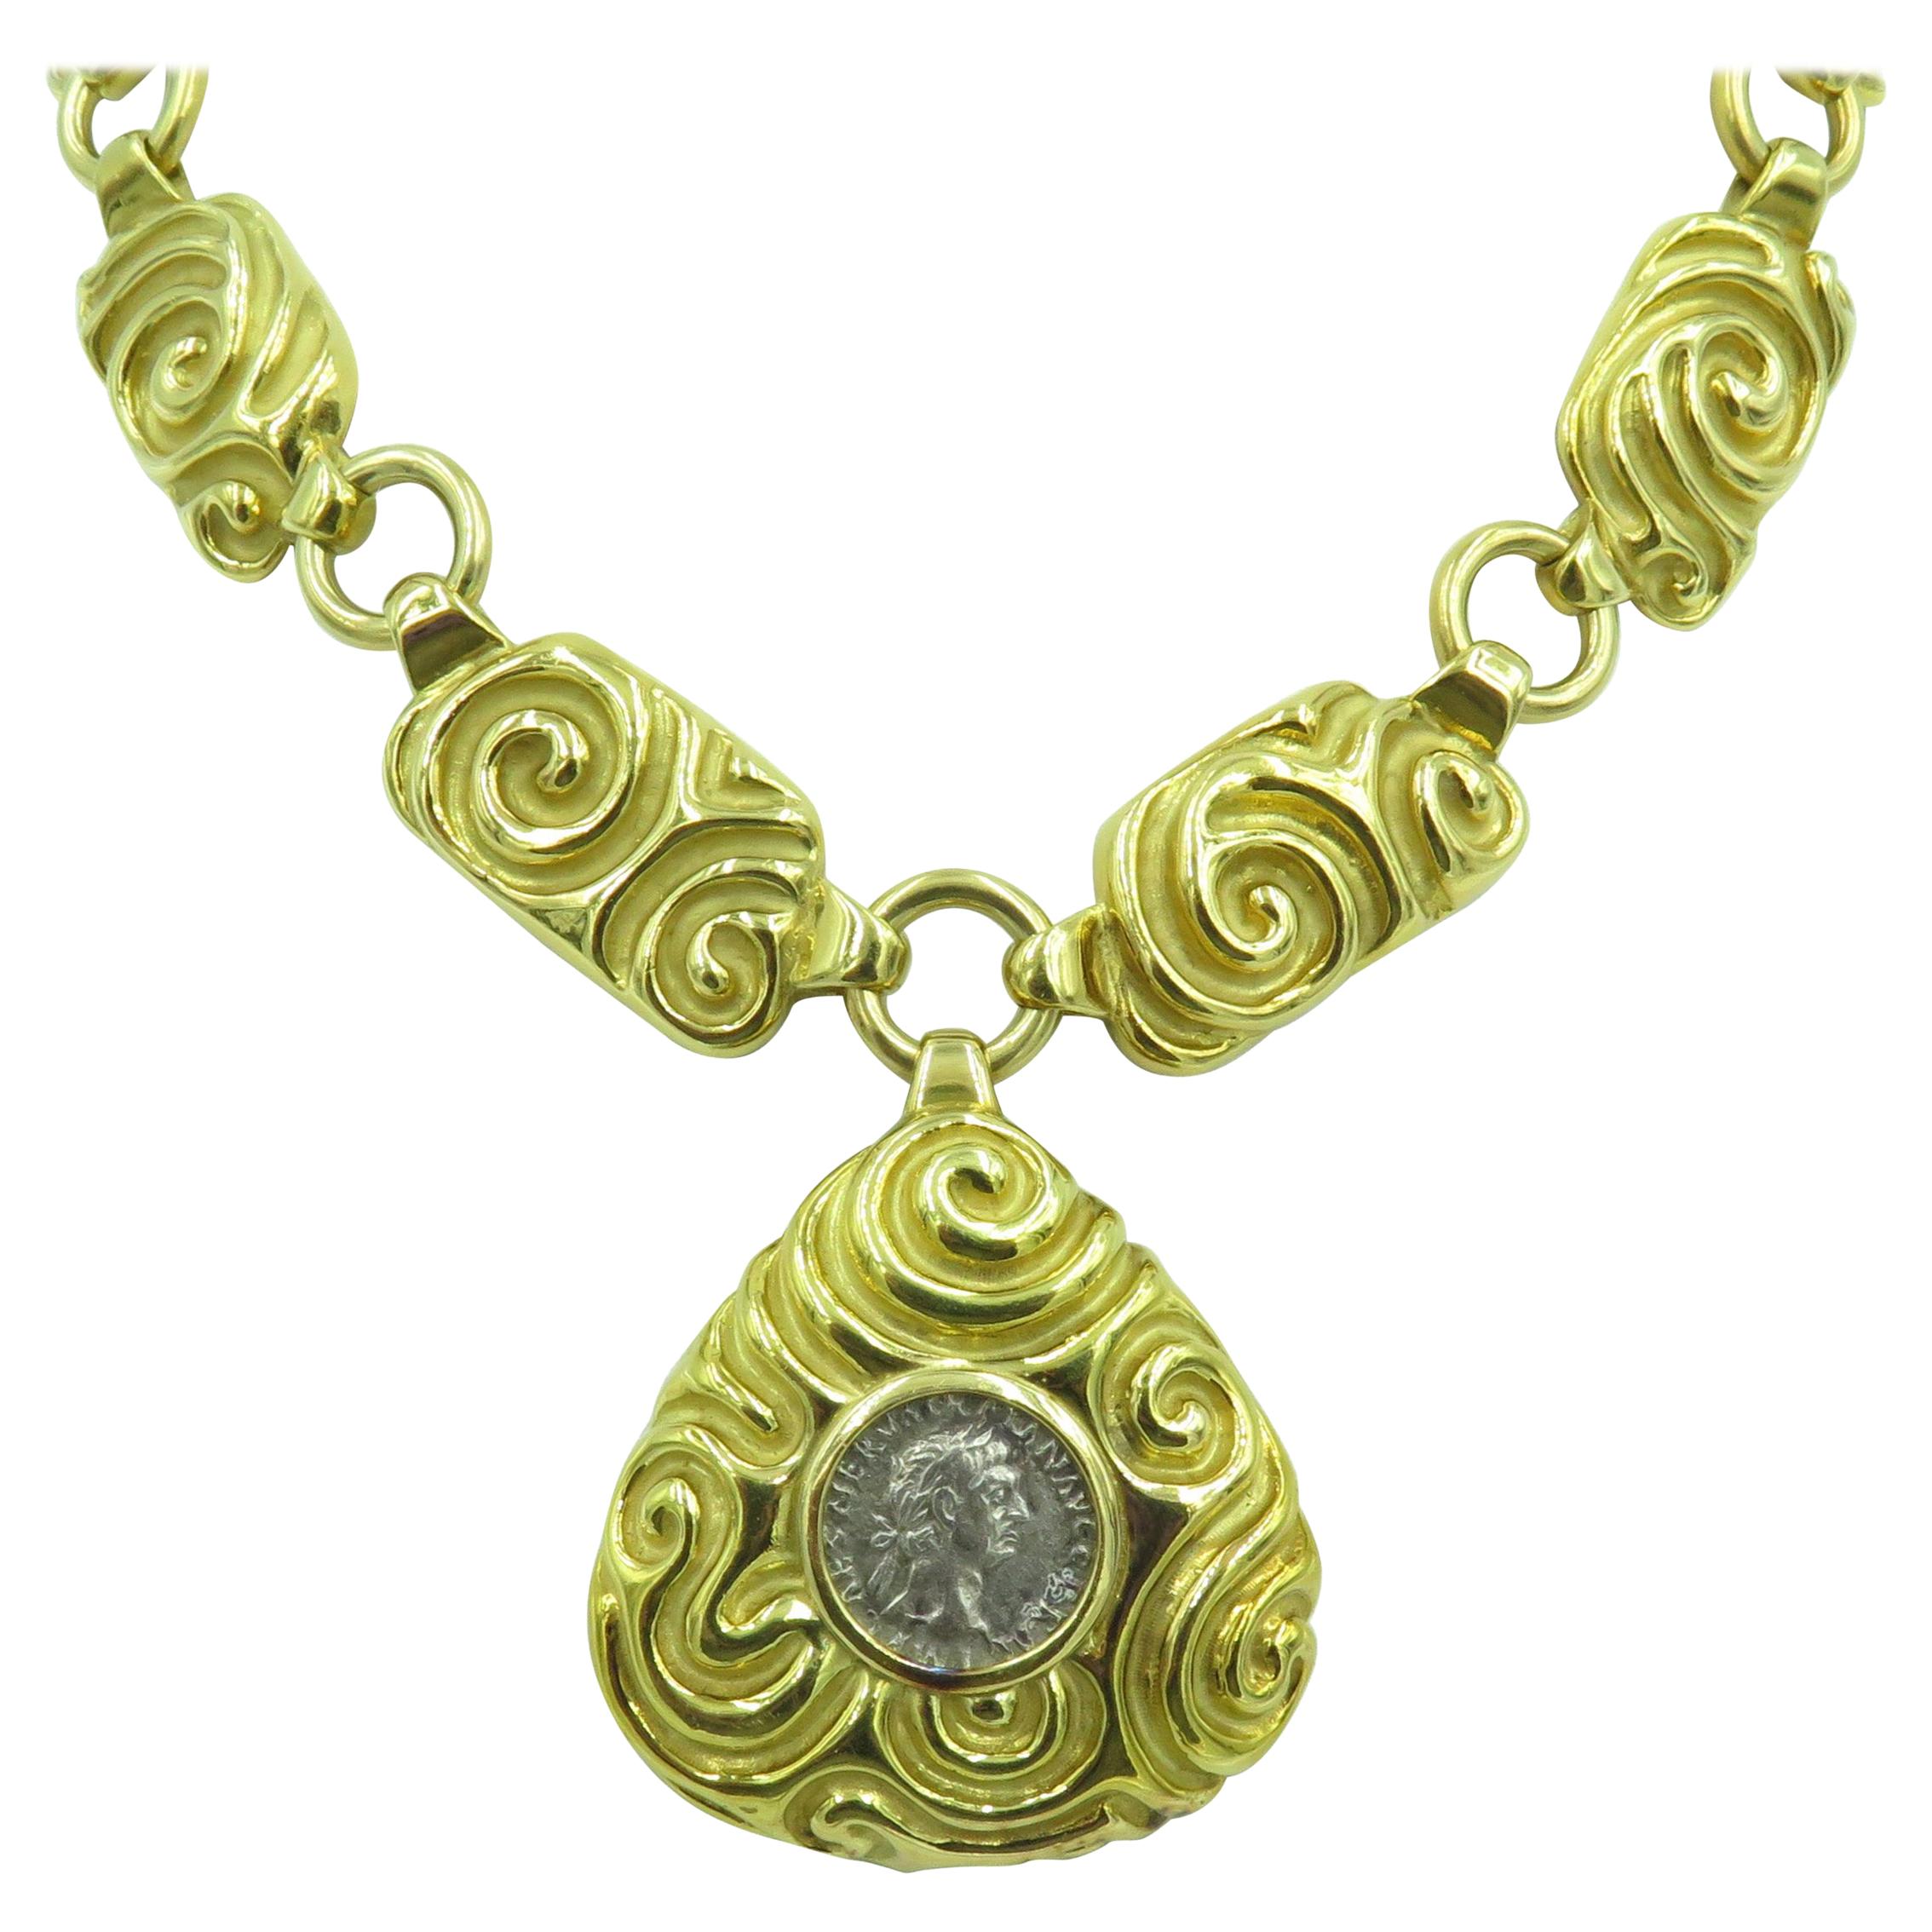 Elizabeth Gage Gold and Ancient Coin Necklace